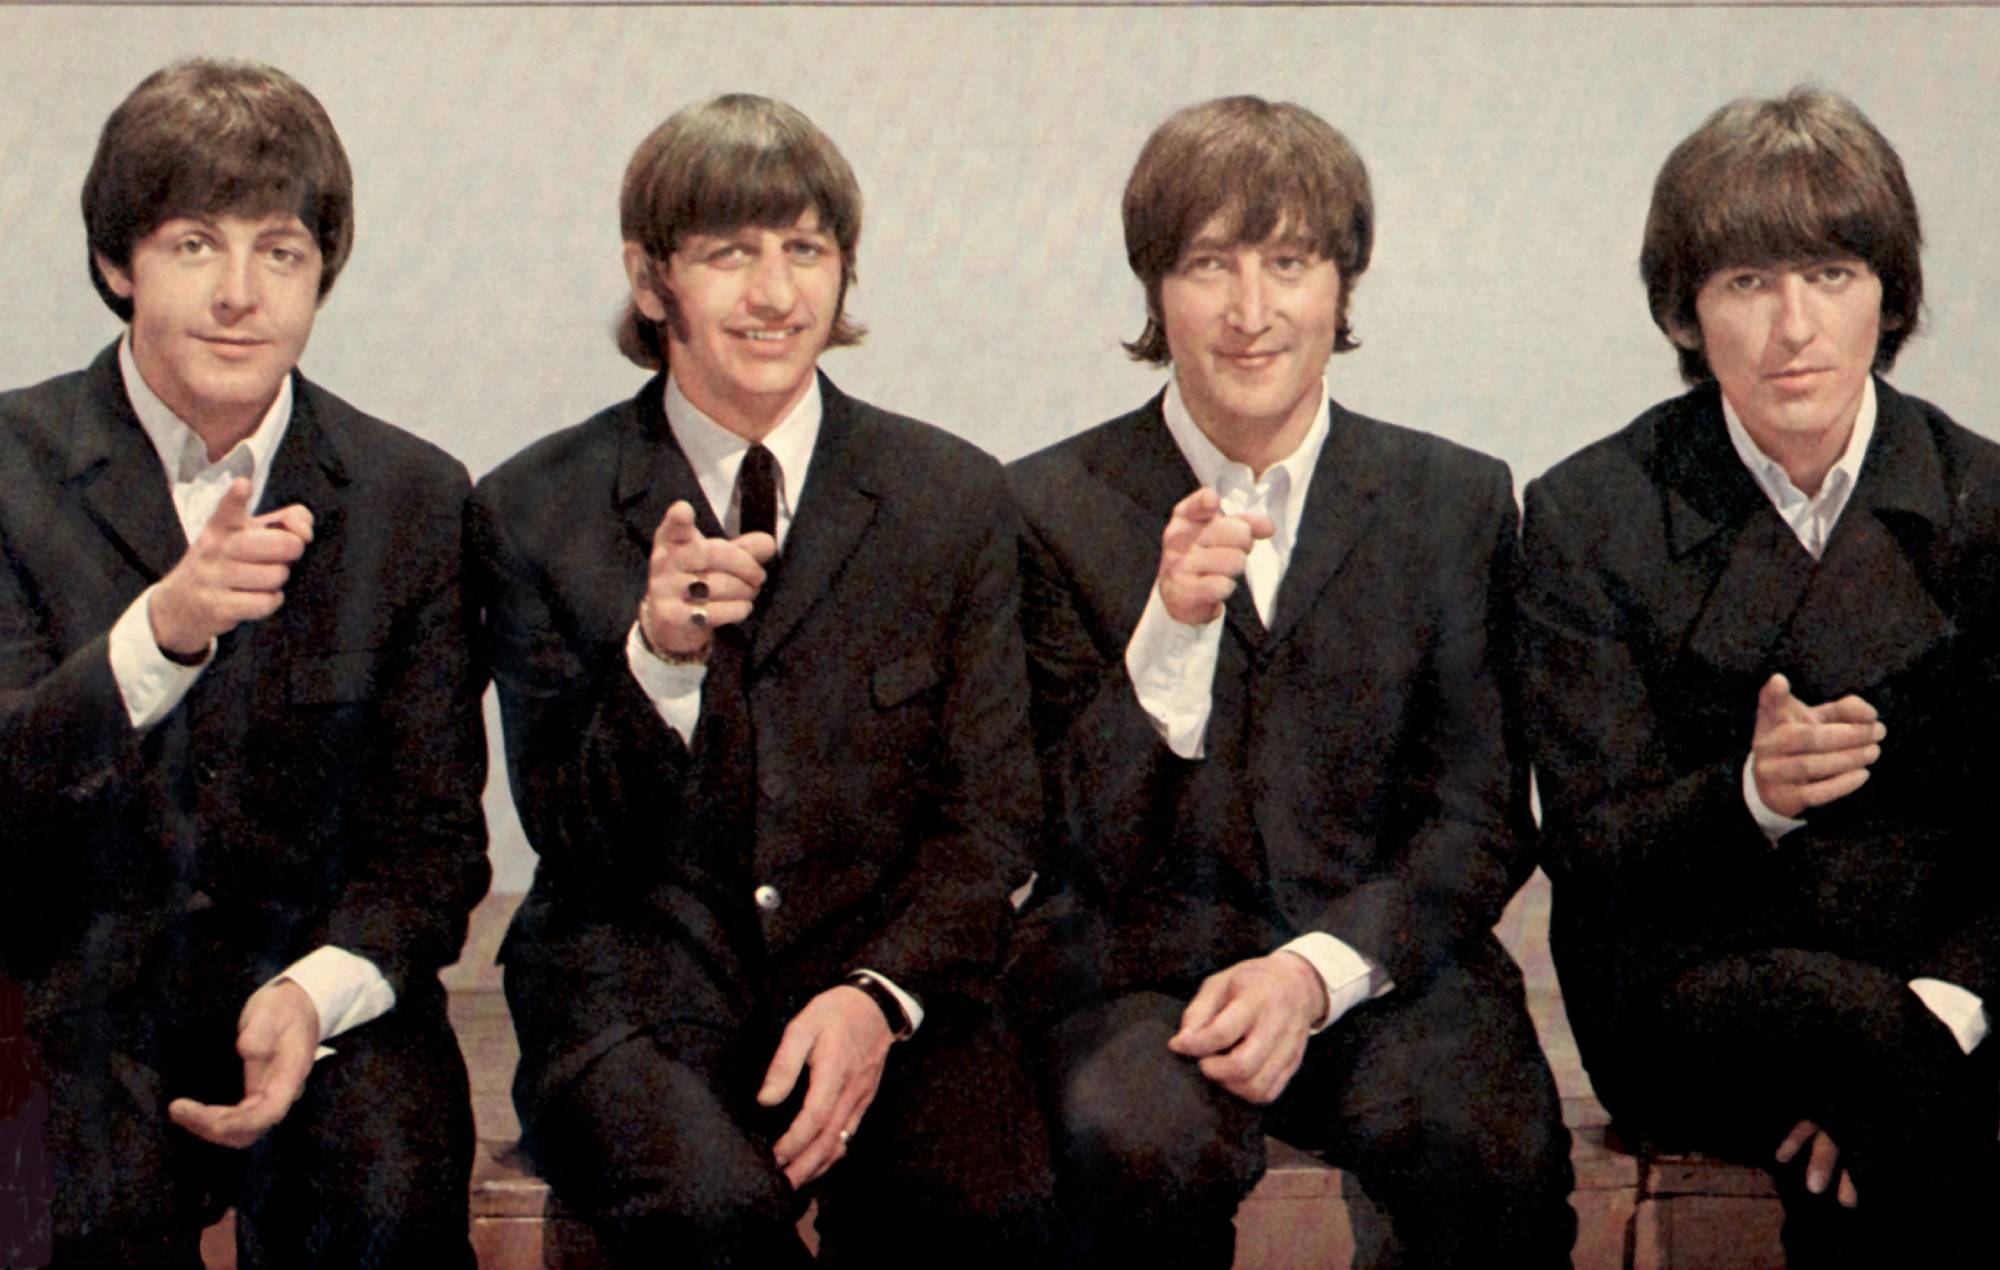 Are The Beatles teasing the release of their “final” song?